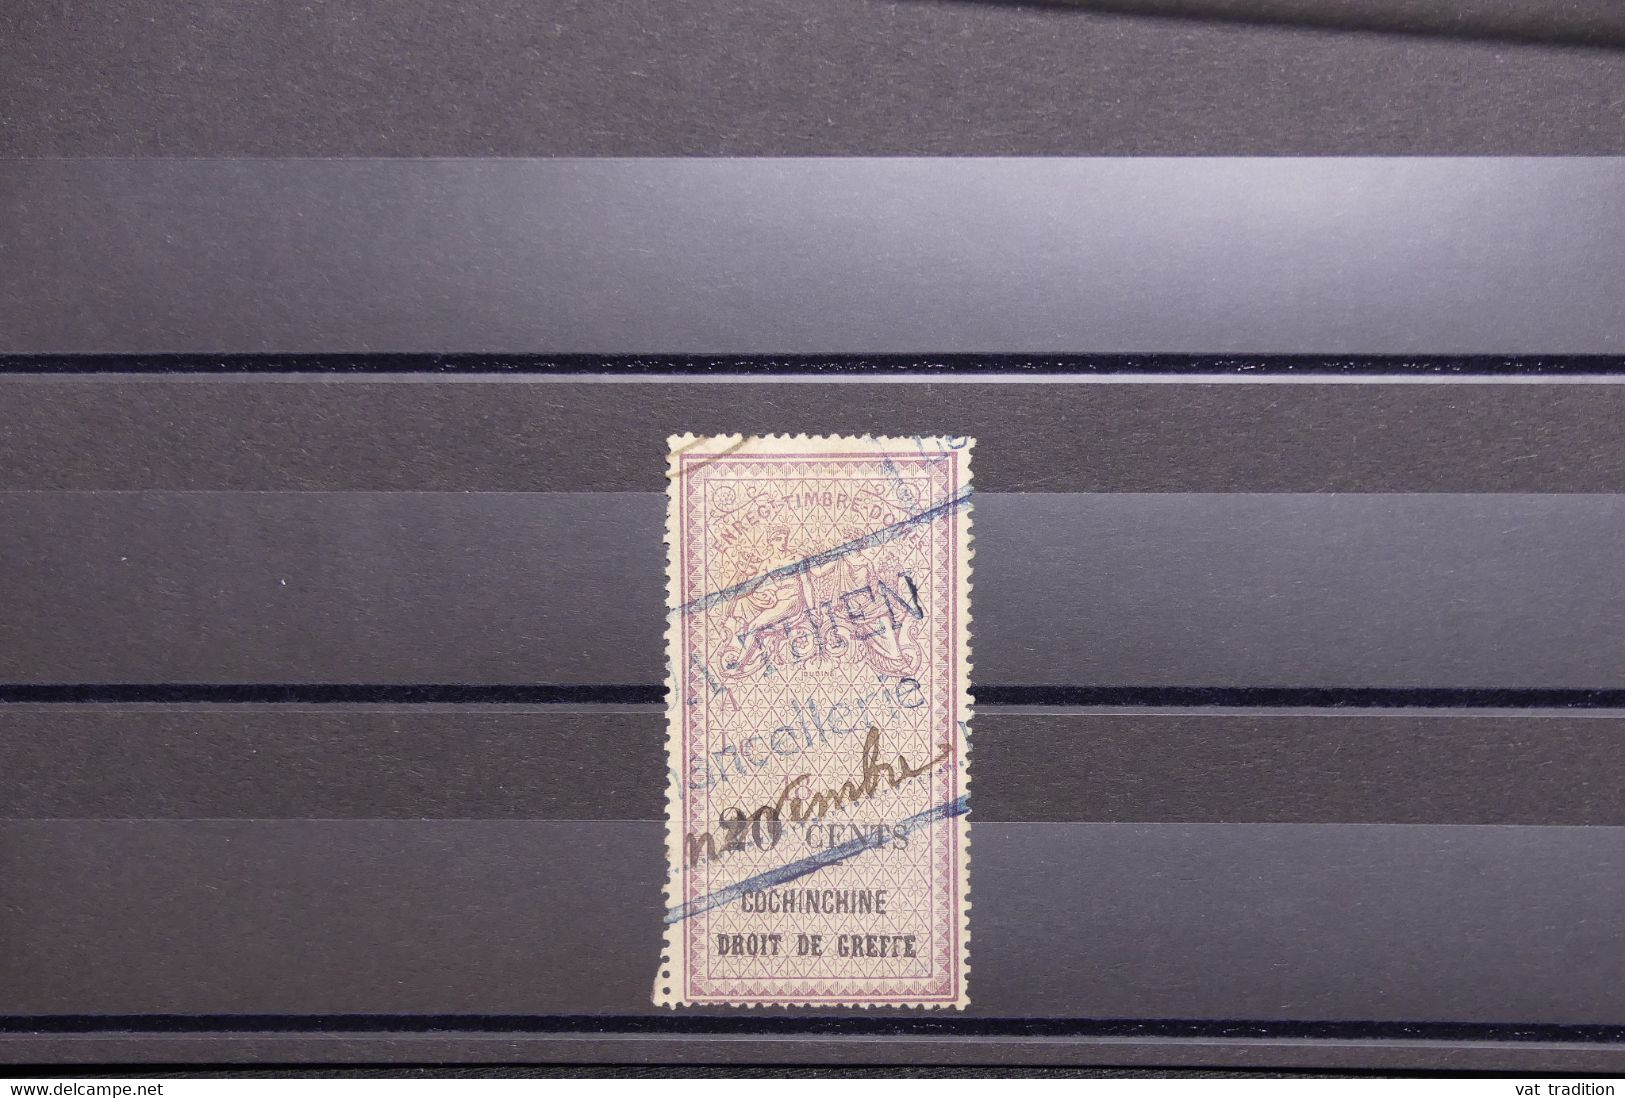 COCHINCHINE - Fiscal Oblitéré - L 125096 - Used Stamps